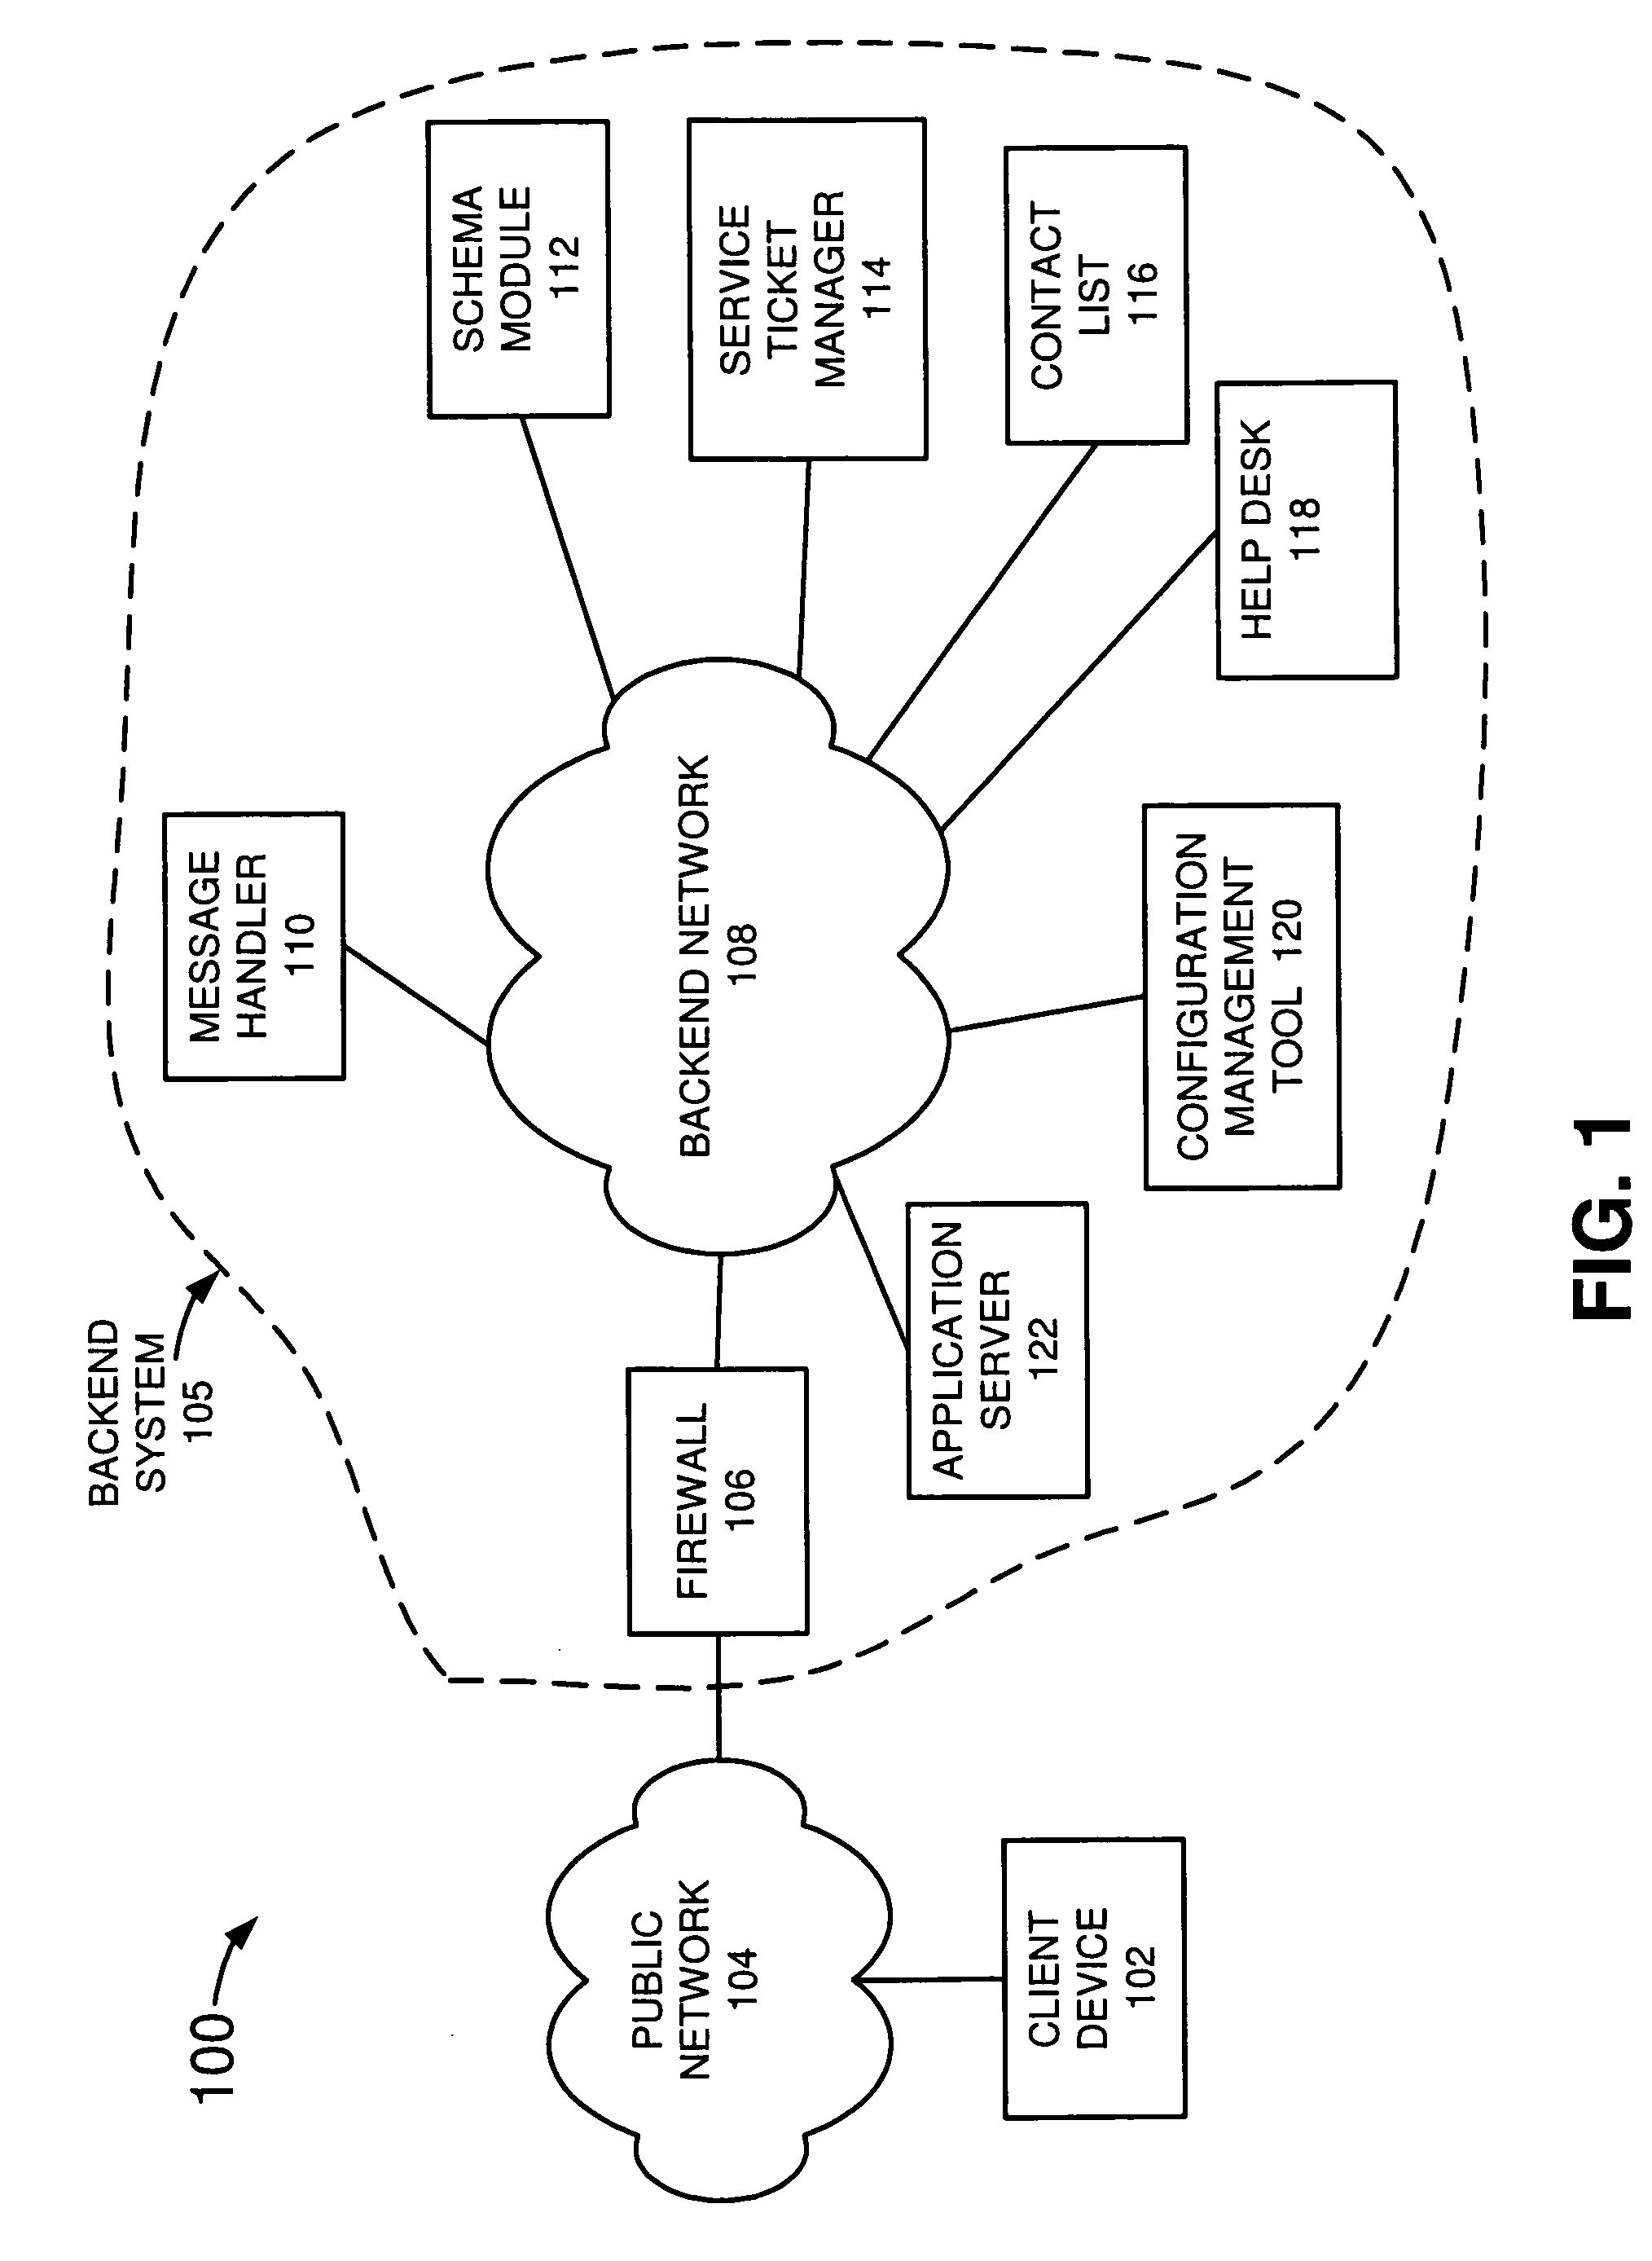 Automated processing of service requests using structured messaging protocols